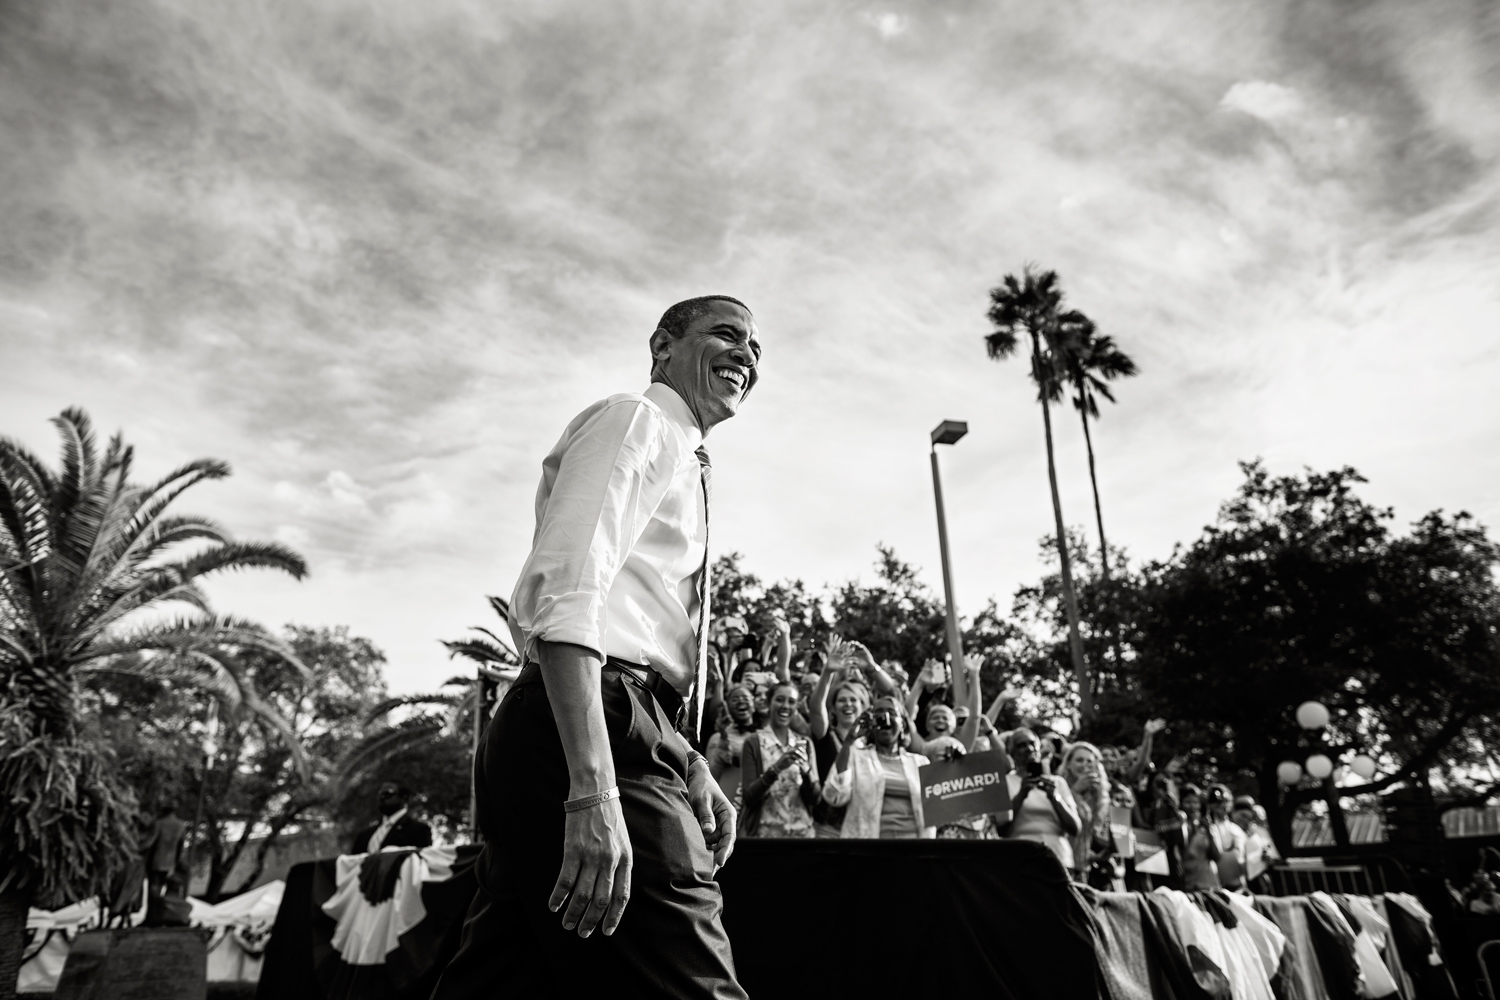 Oct. 25, 2012. President Obama attends a campaign rally in Tampa.